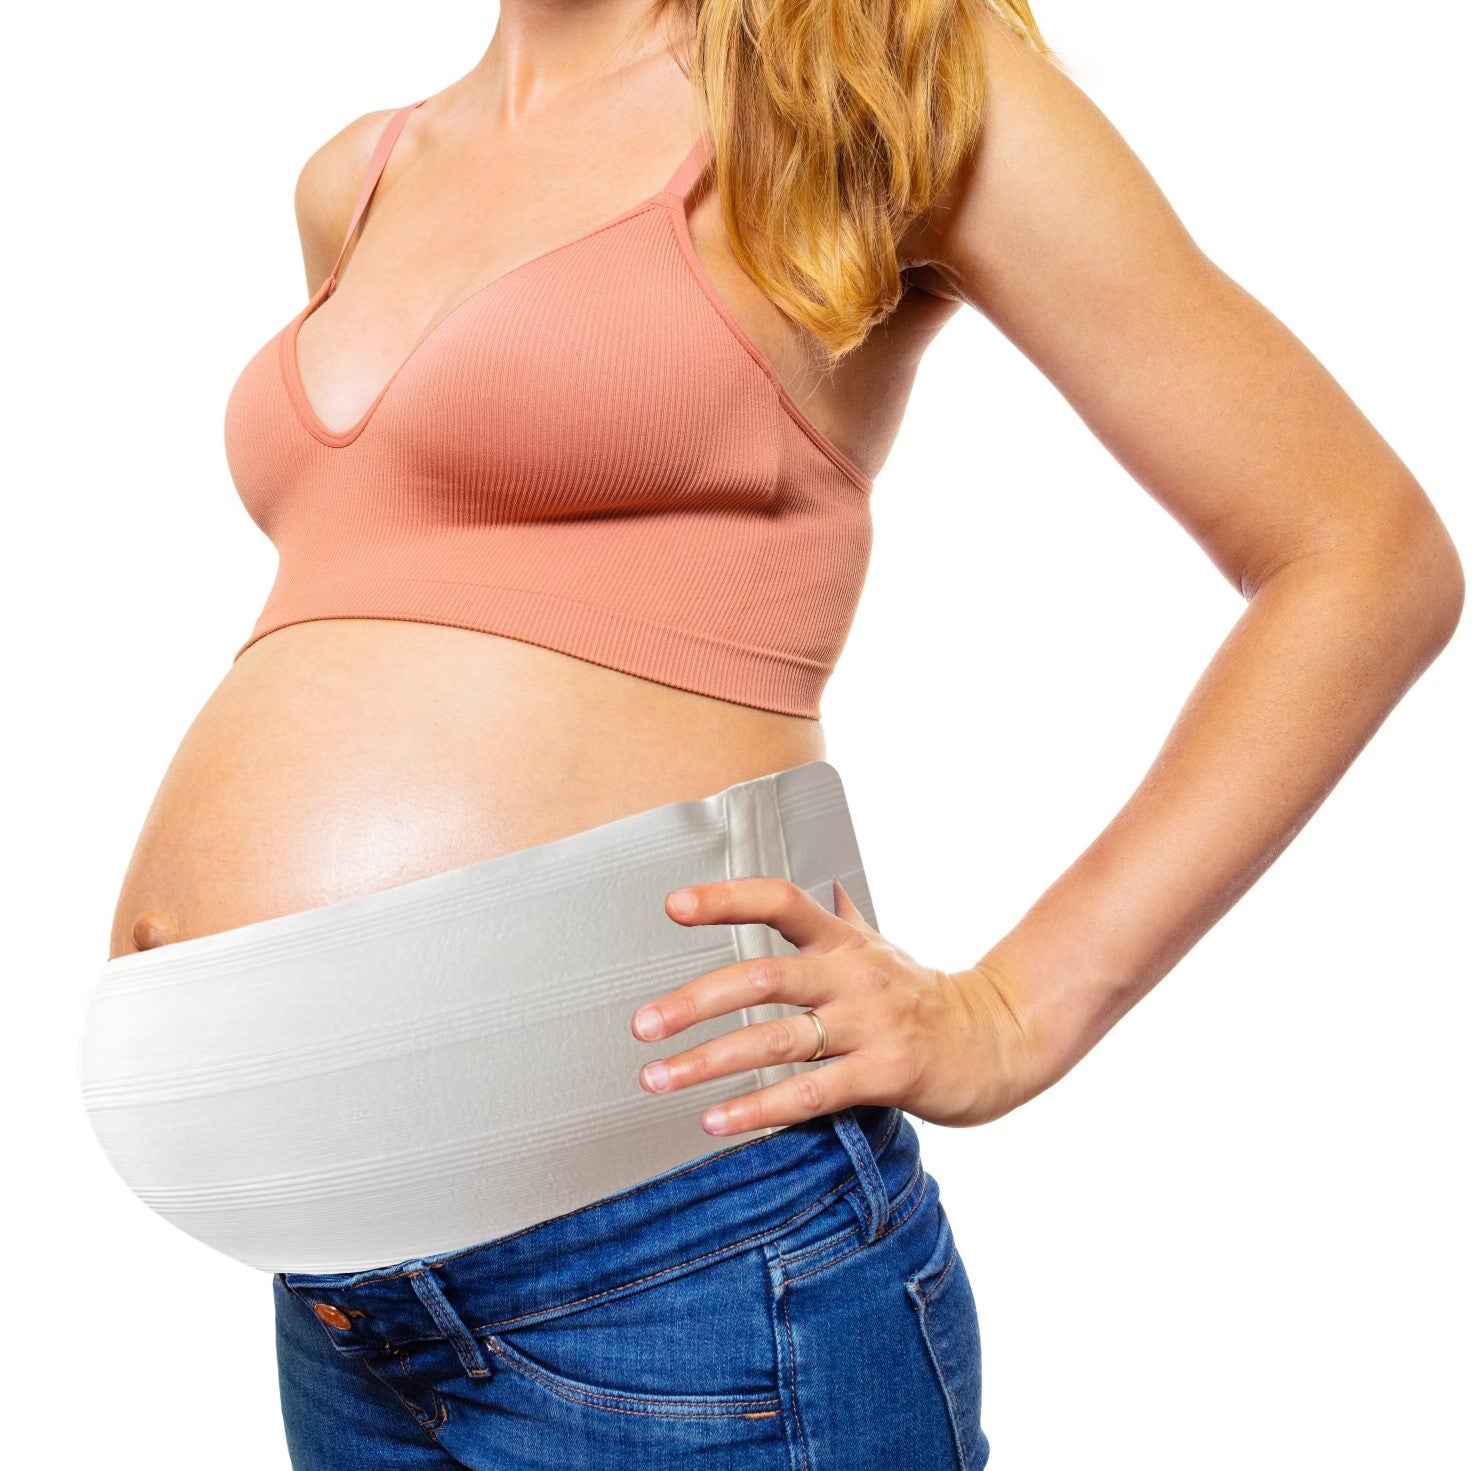  Belevation Maternity Belly Band, Pregnancy Support